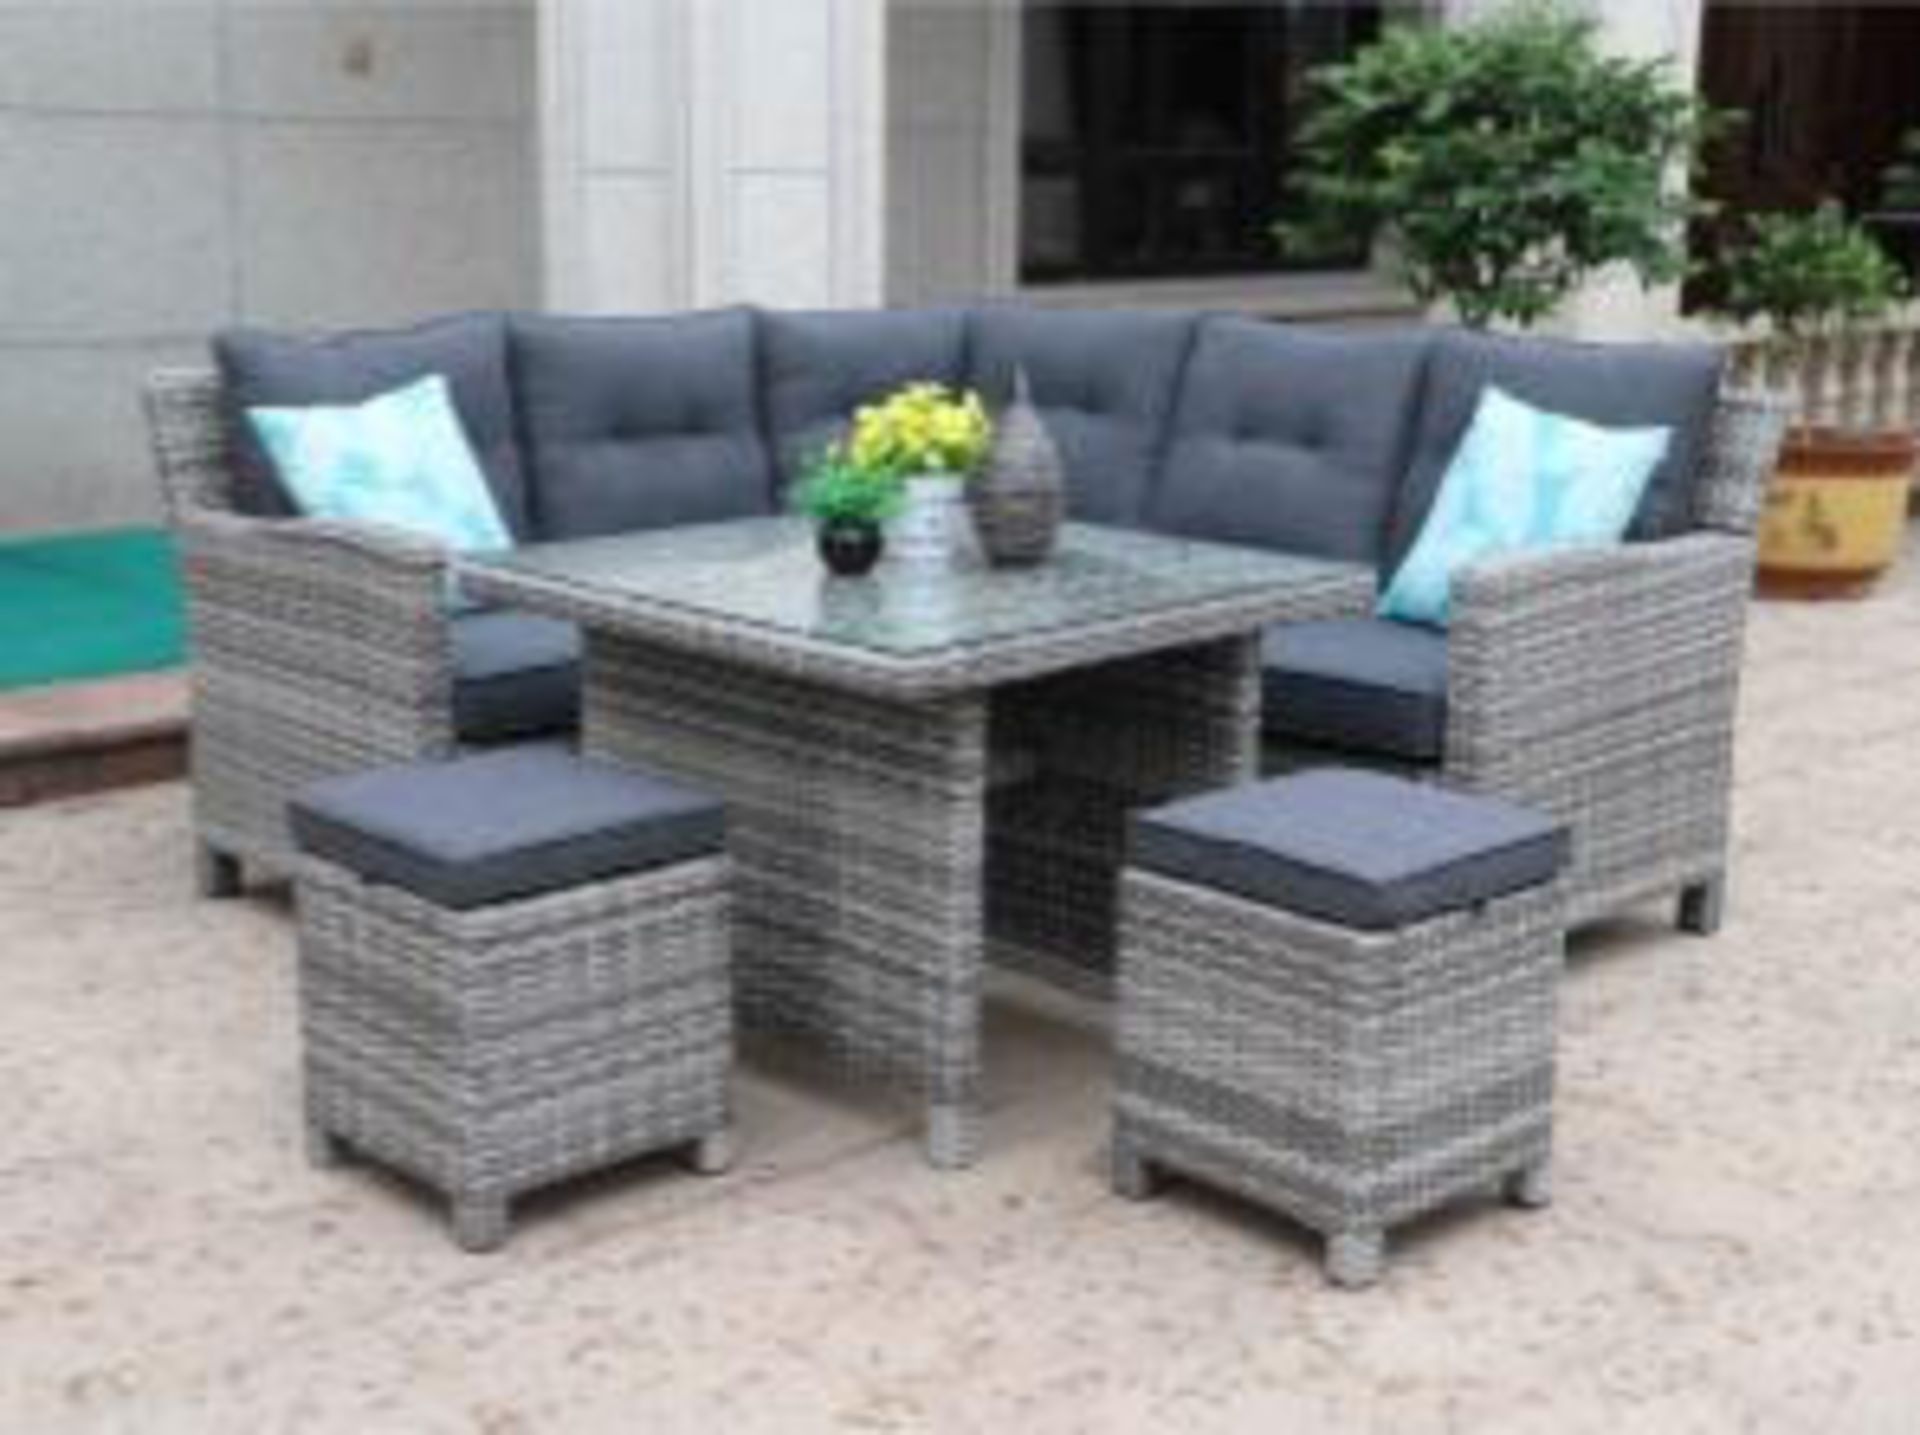 + VAT Brand New Chelsea Garden Company Grey Corner Dining Sets With Cushions Inc Footstools & Glass